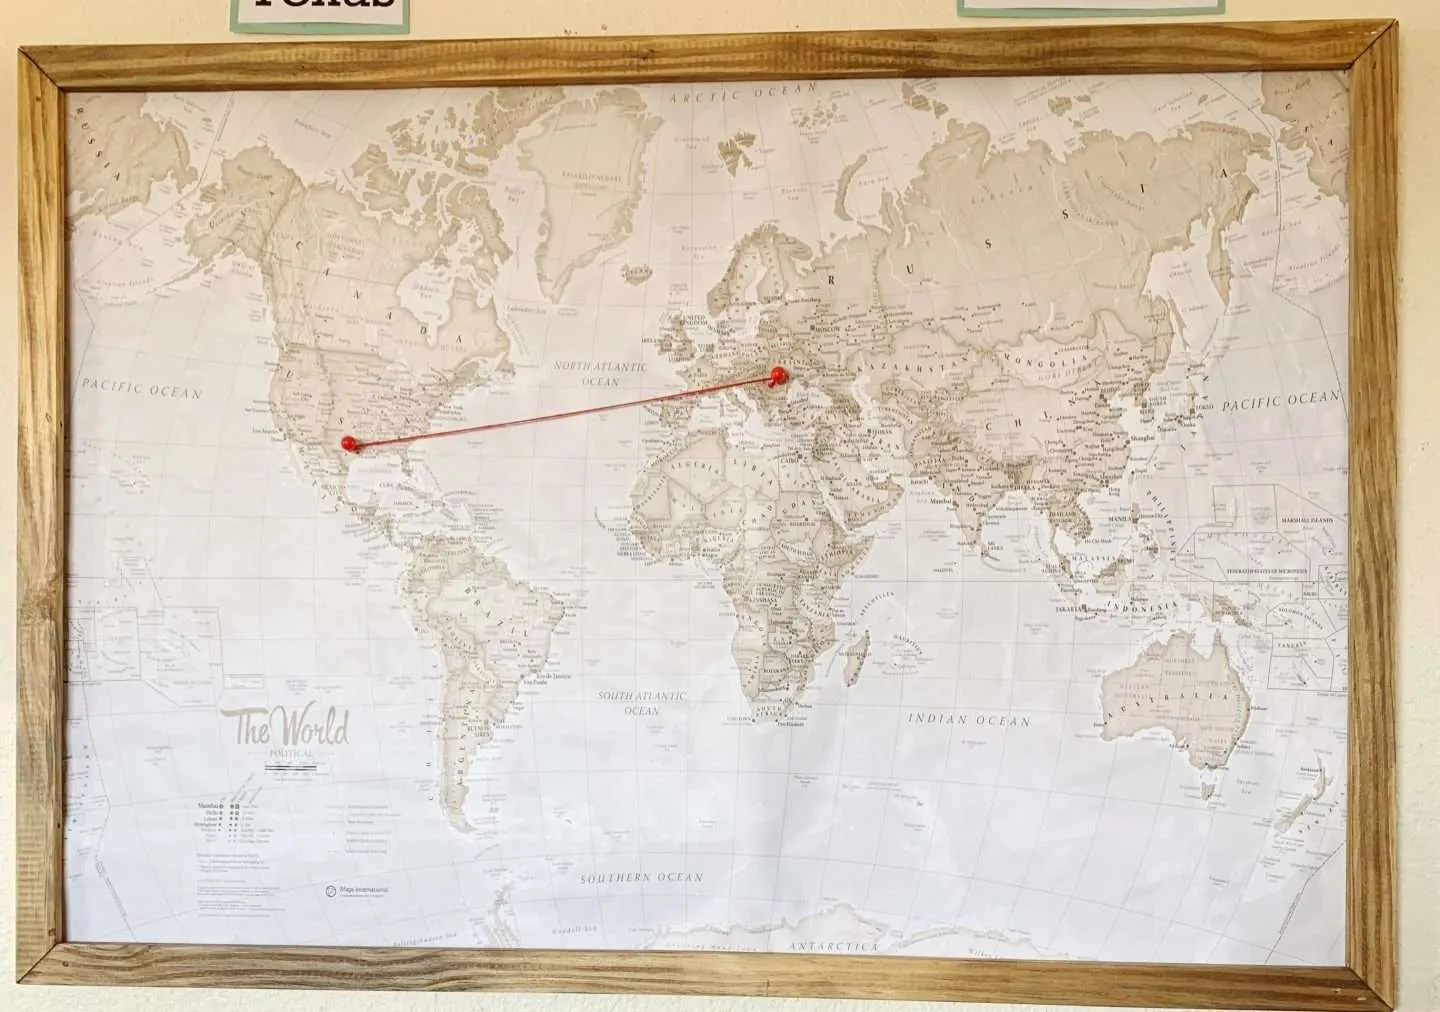 Hang a world map on your deployment wall.